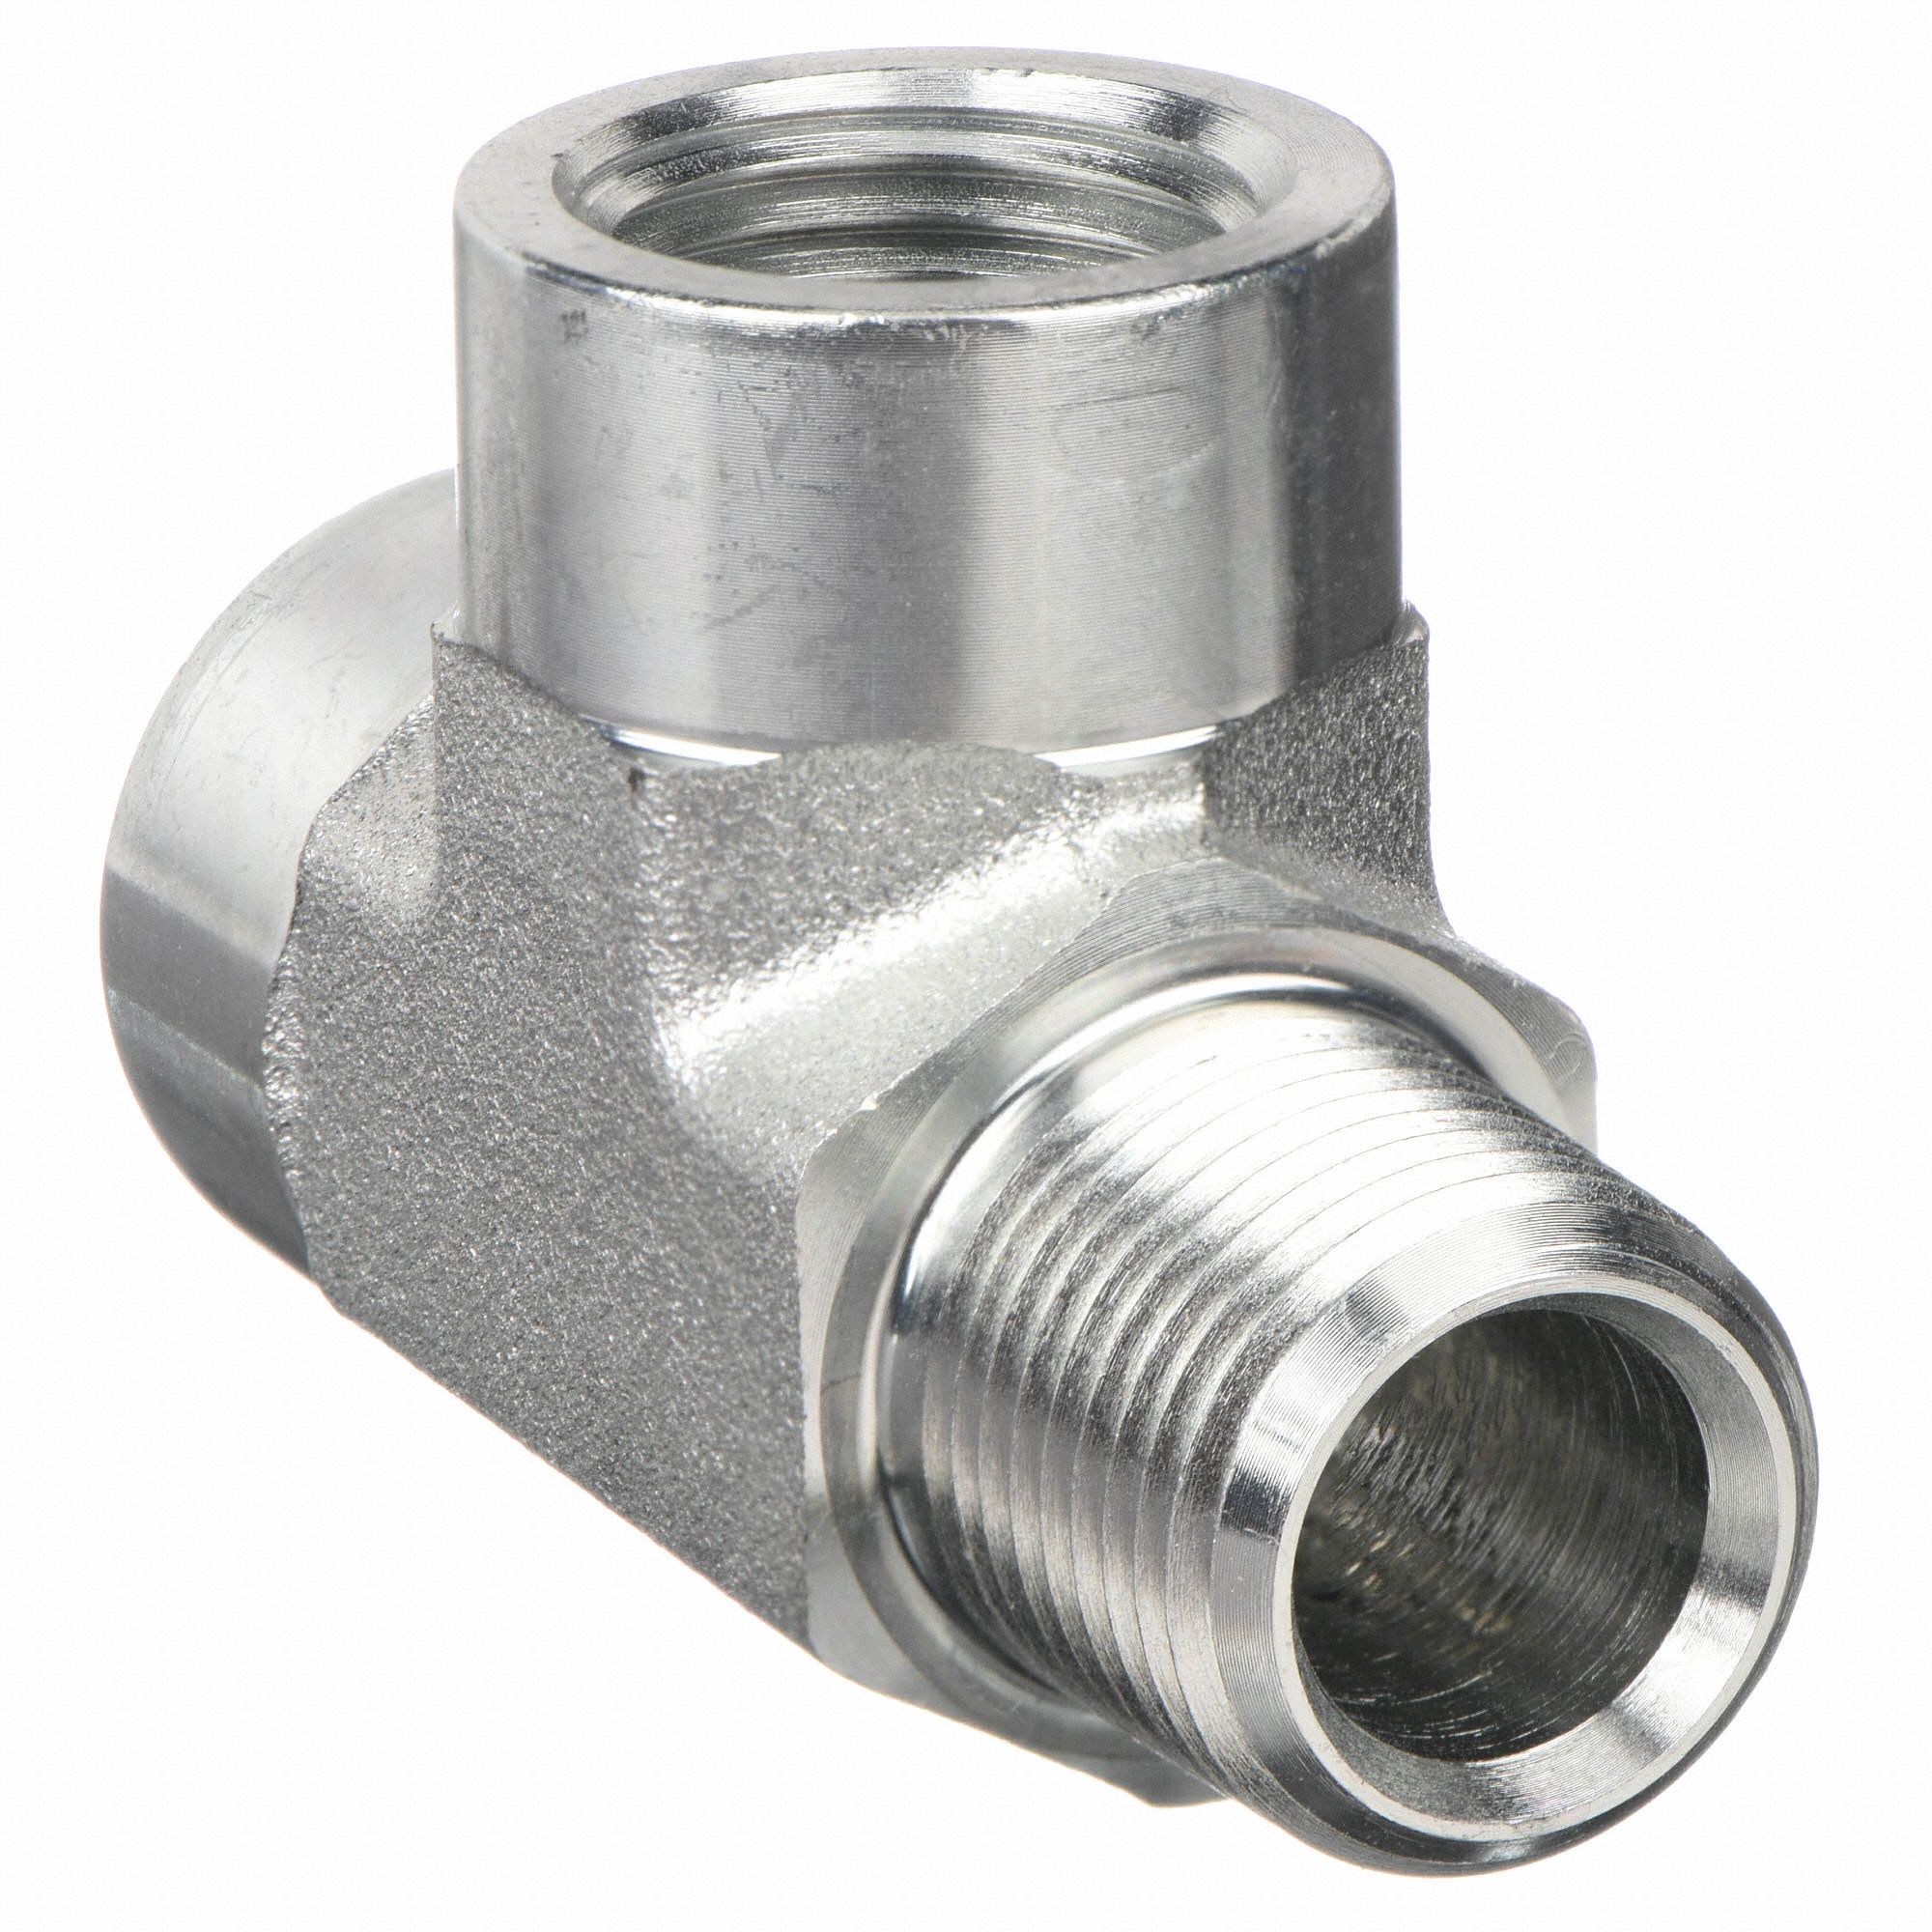 Details about   3/8" NPT x 1/2" Tube Push To Connect Stainless Steel Tee 